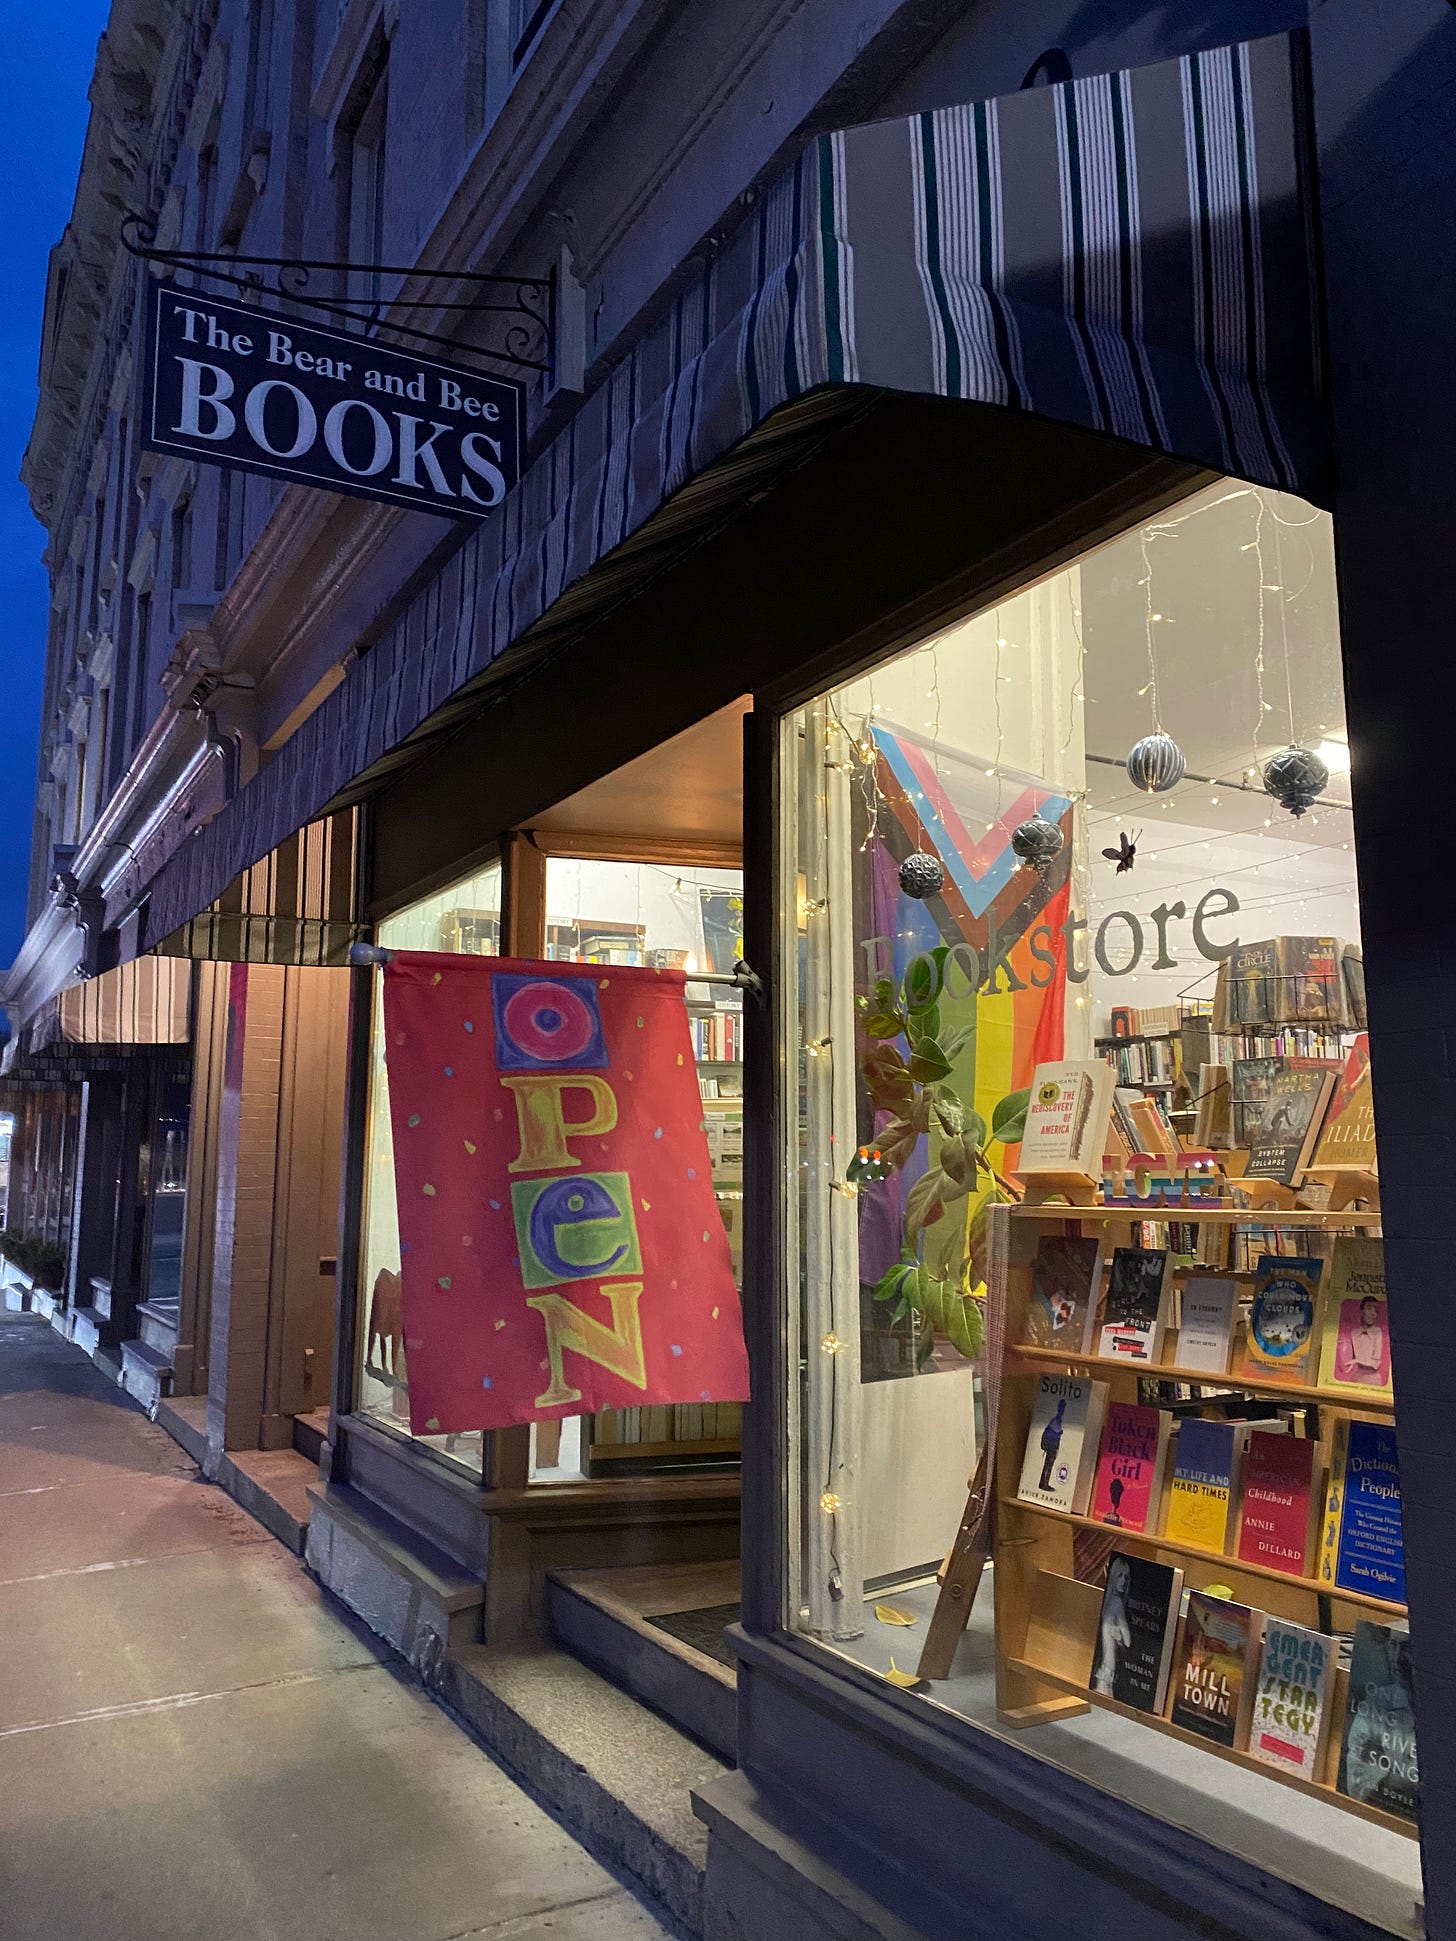 A brightly lit bookshop with a large pride flag hanging in the window.